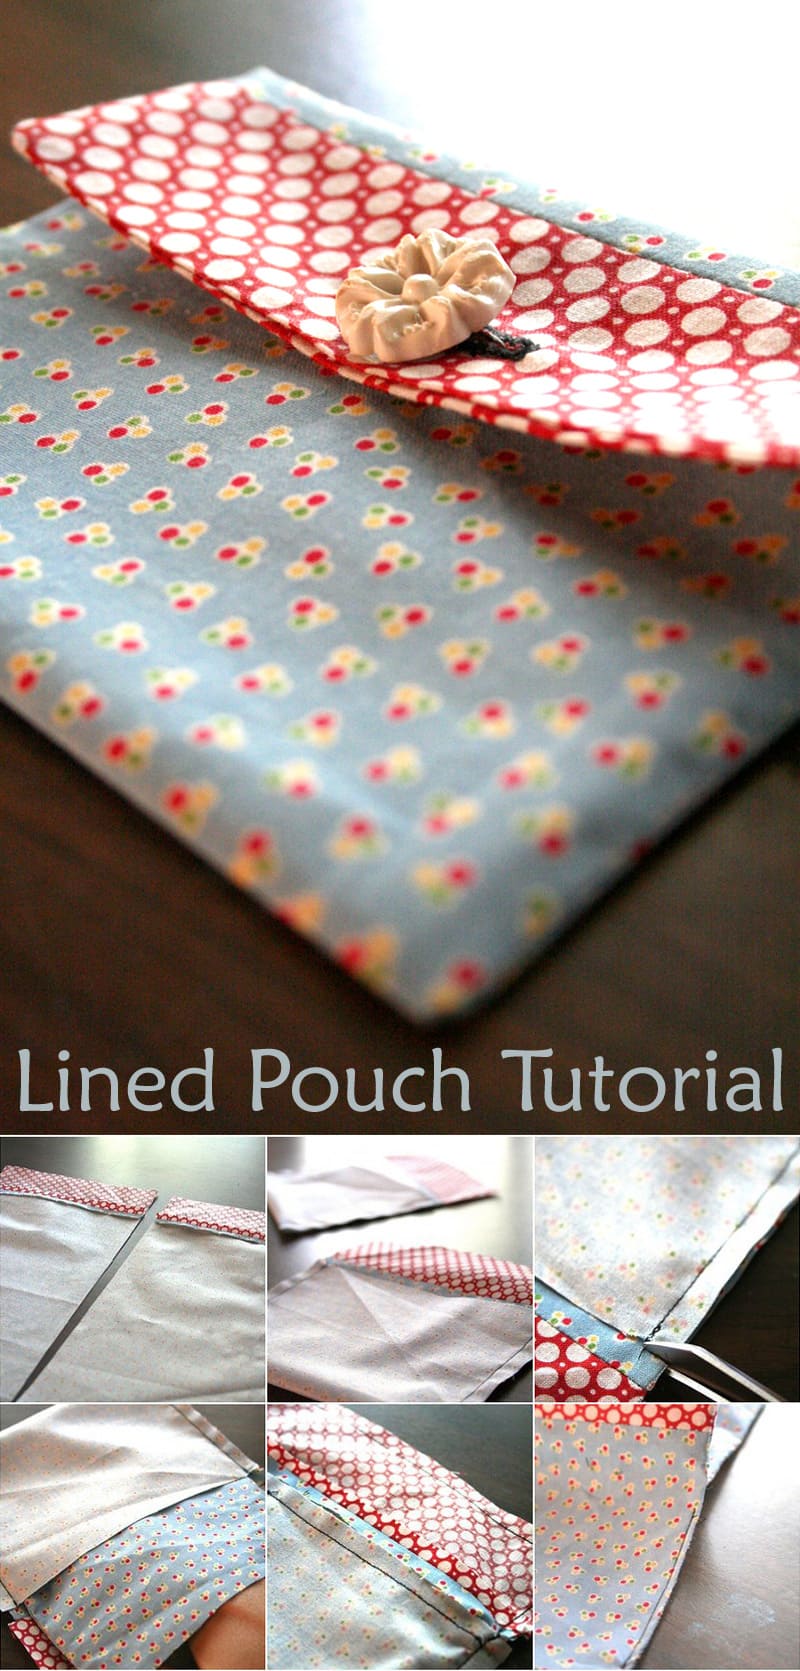 Lined Pouch Tutorial